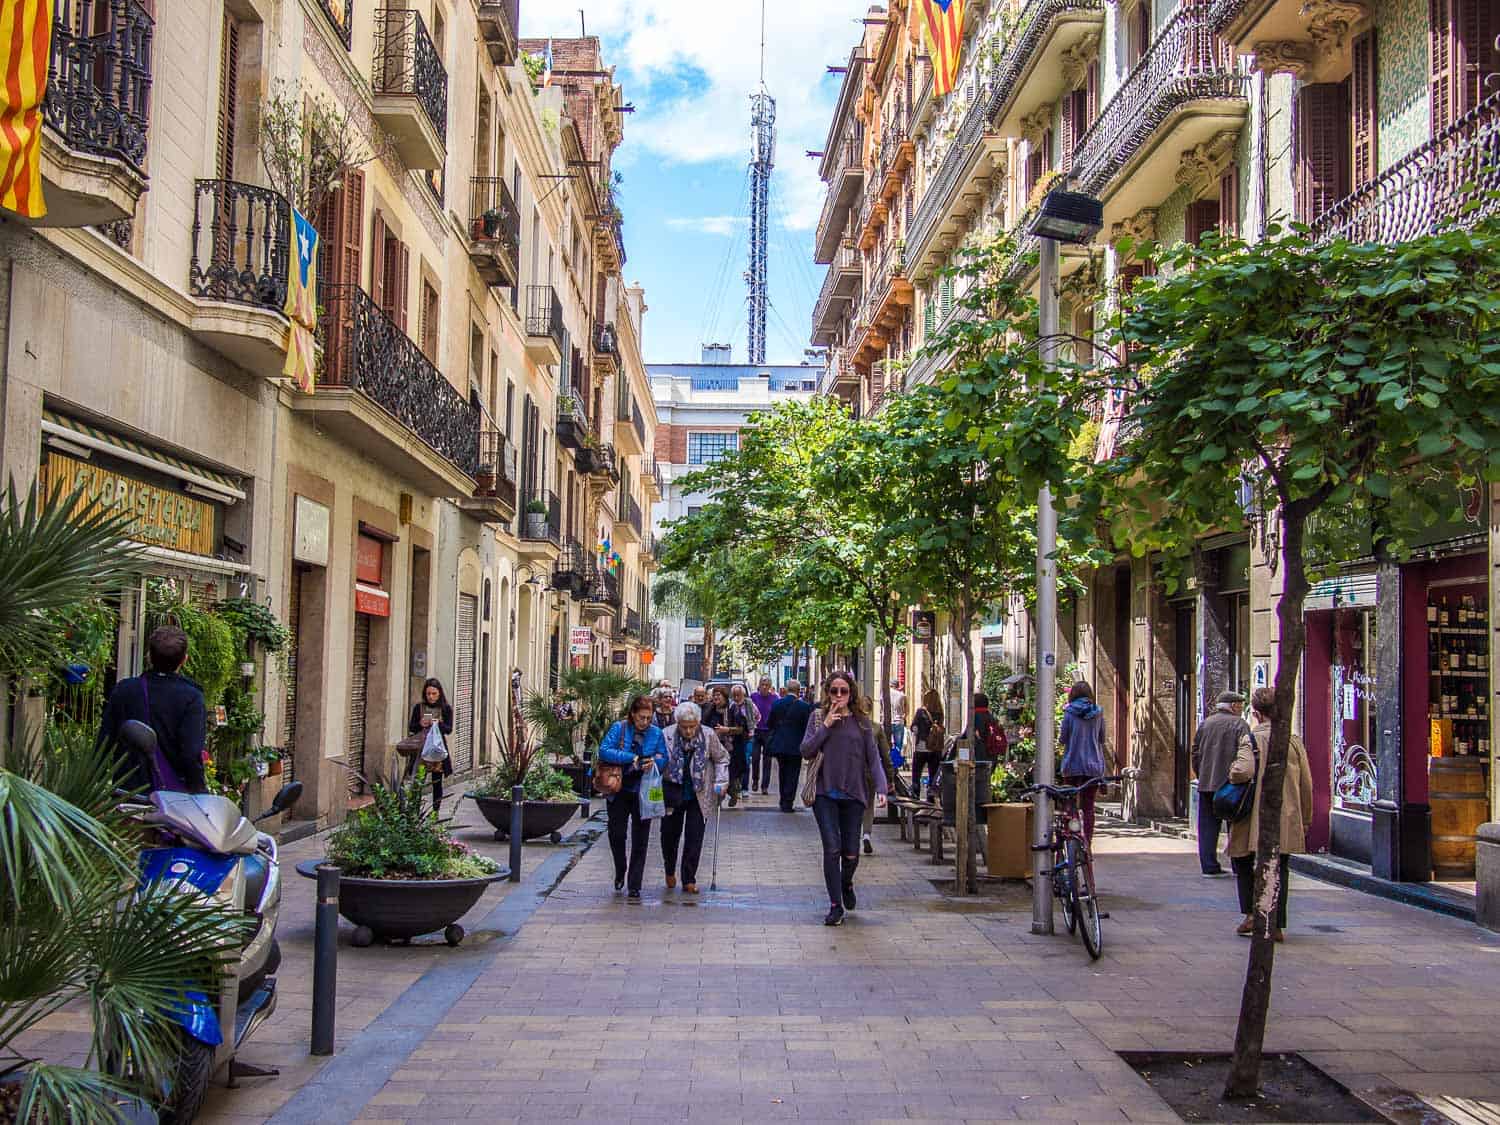 Gràcia, another area that is safe for accommodation